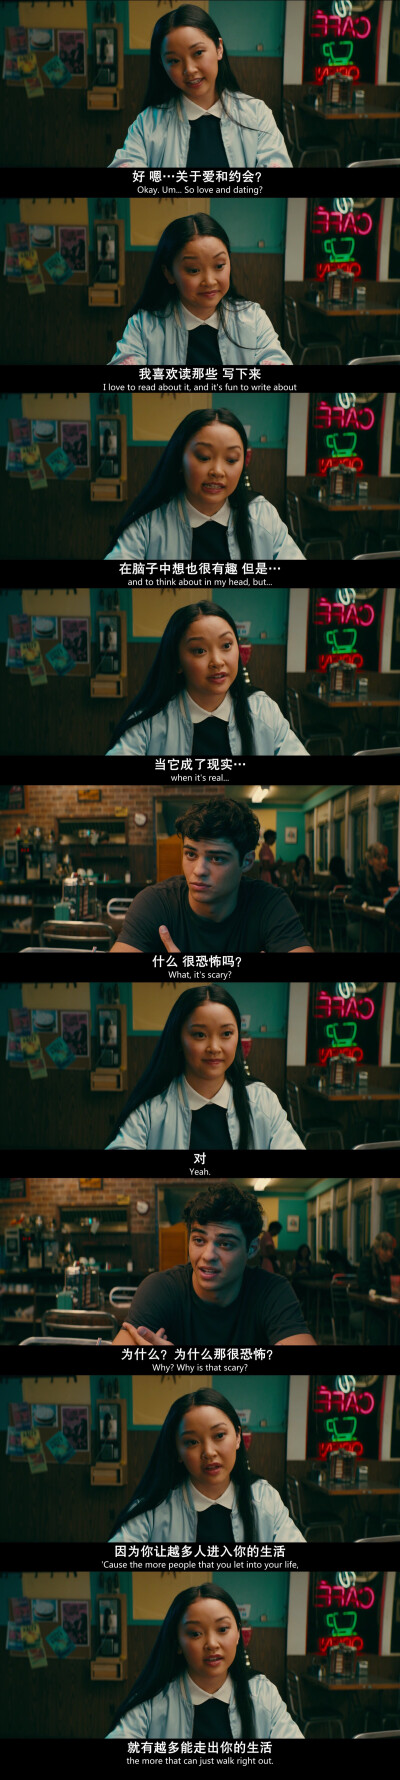 To All The Boys I’ve Loved Before
致所有我爱过的男孩